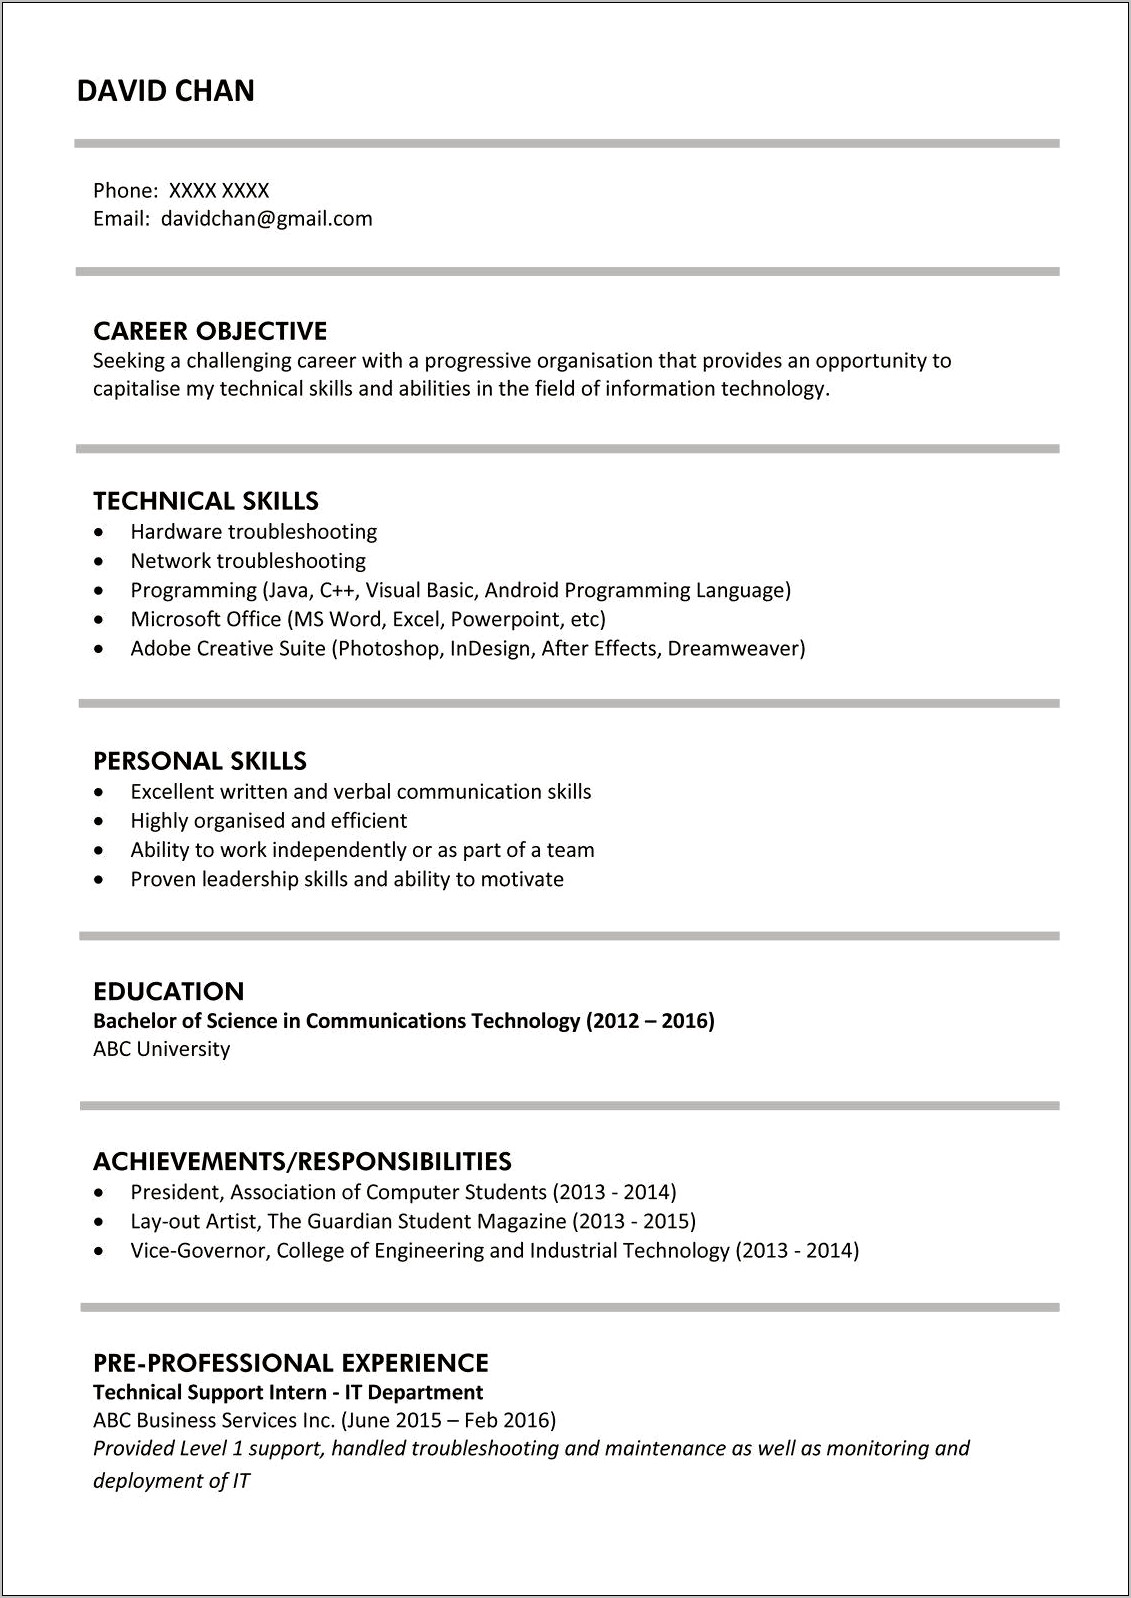 Resume For College Student Tech Skills